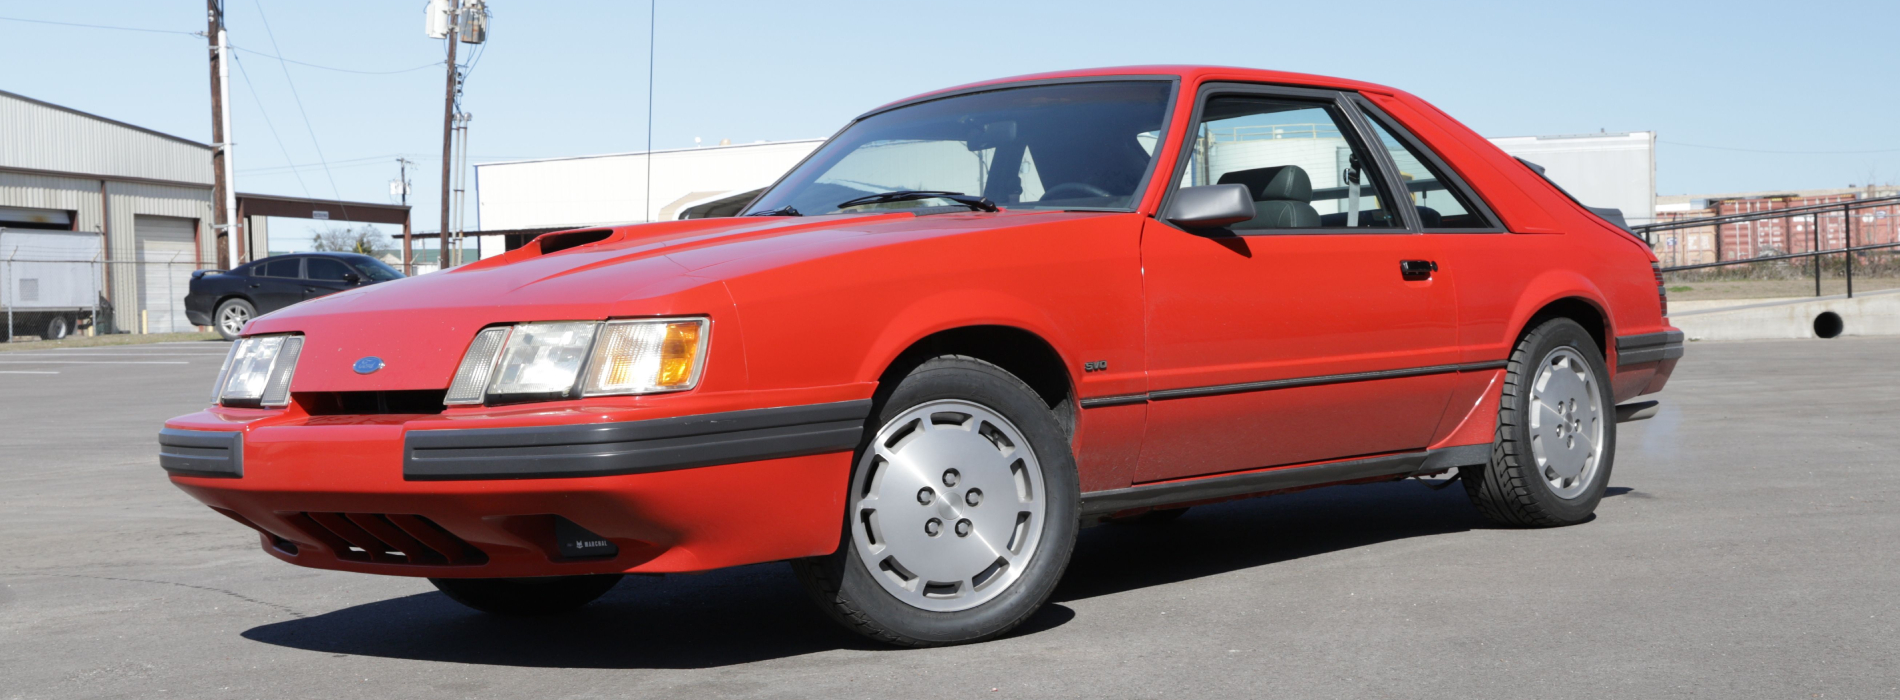 Fox Body Mustang Paint Codes | 1979-93 - Fox Body Mustang Paint Codes | 1979-93